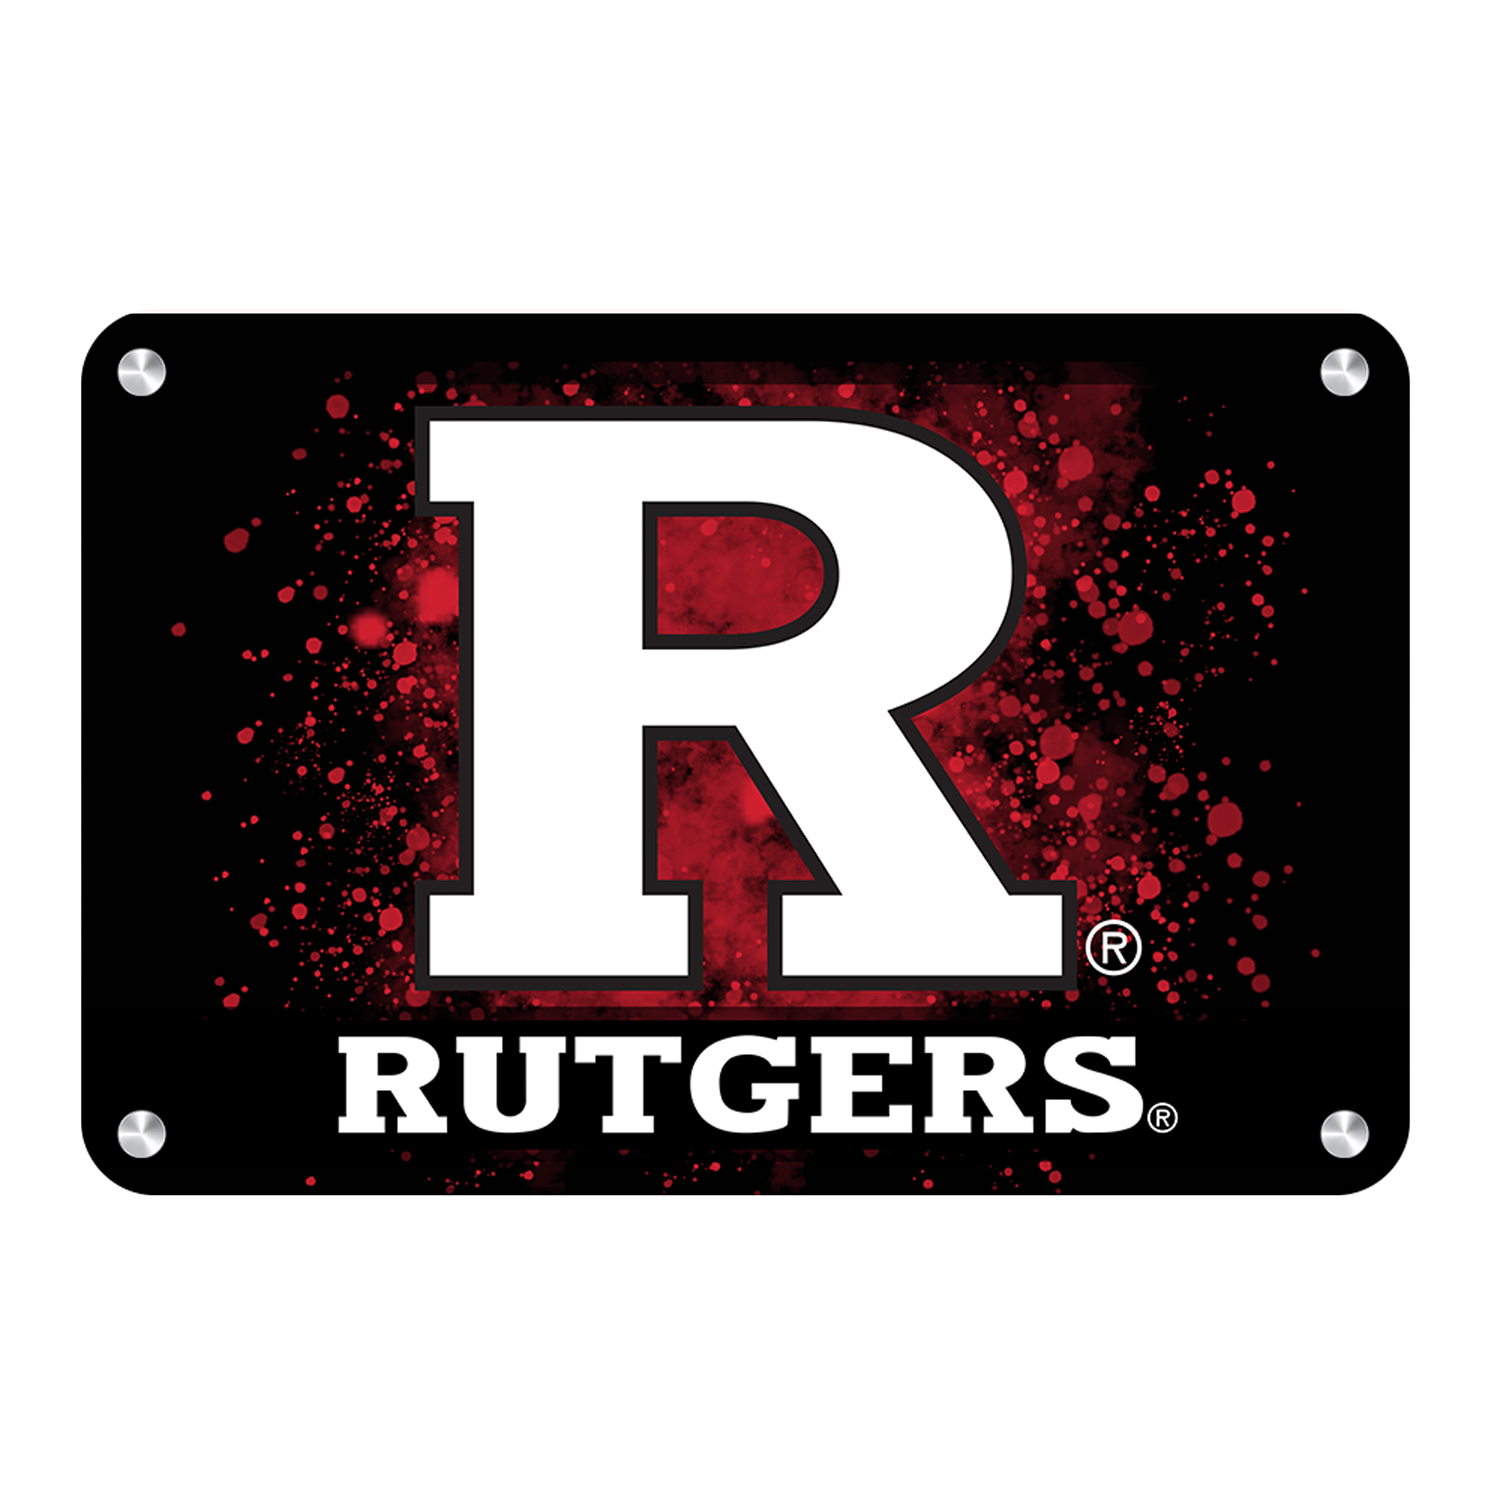 Rutgers Scarlet Knights - Rutgers R - College Wall Art #Canvas